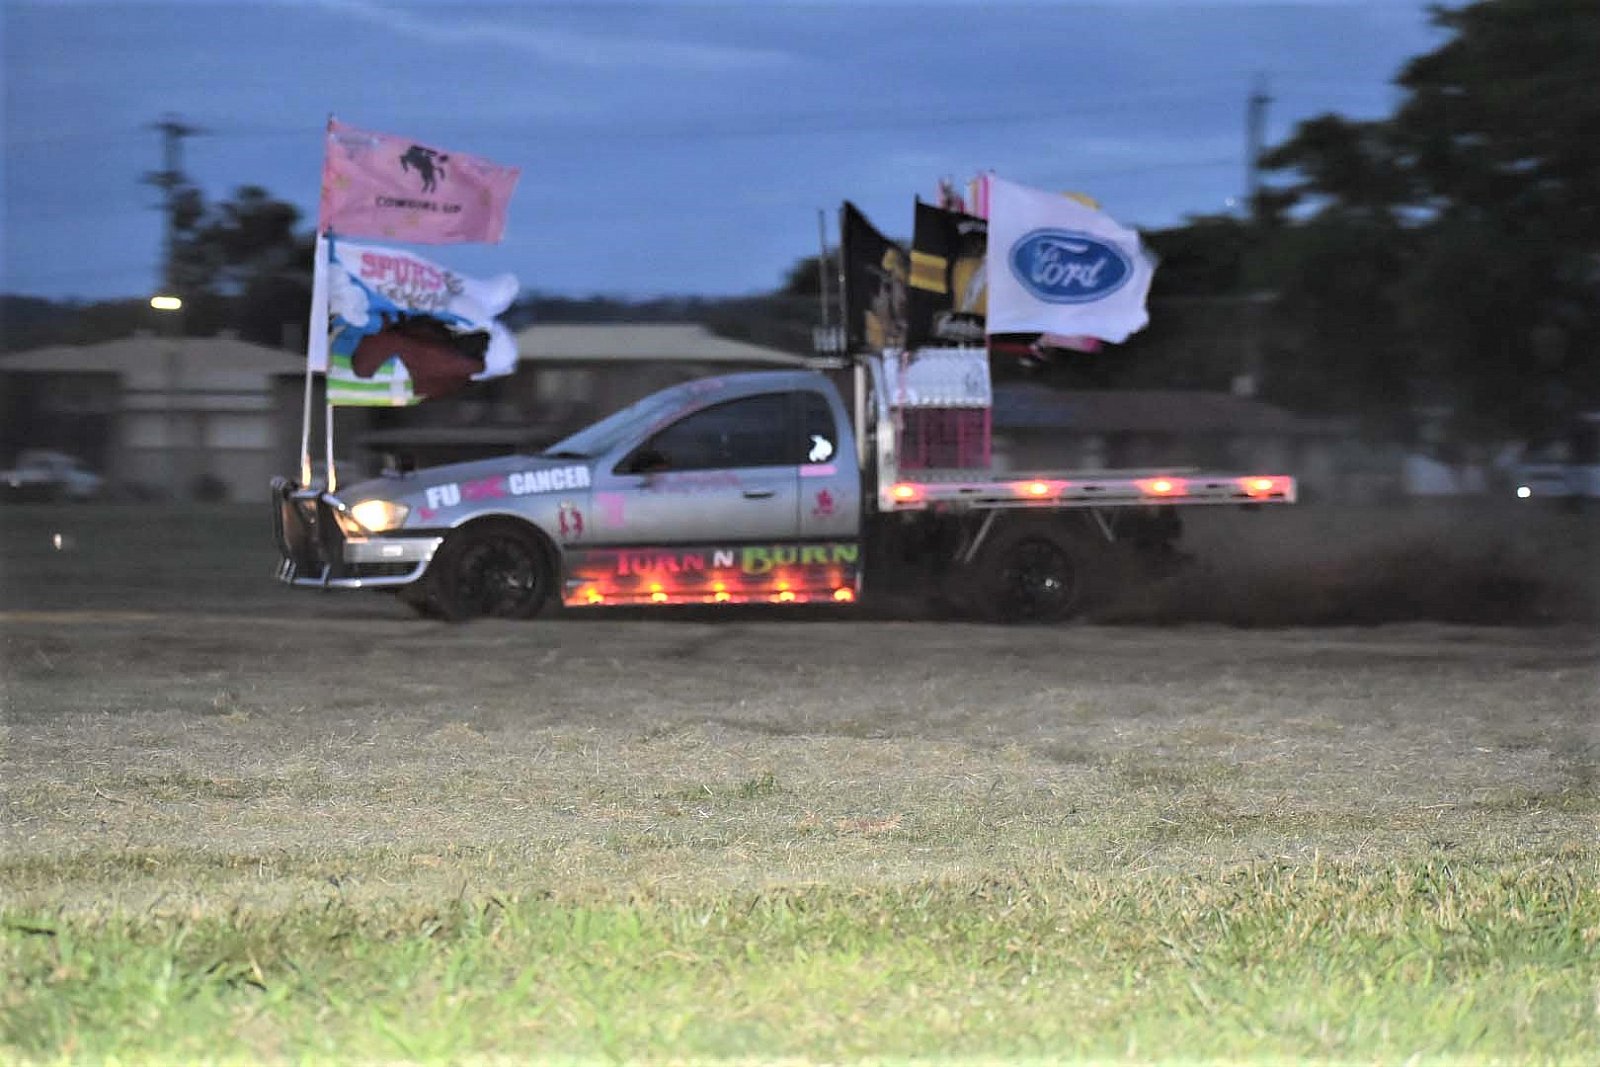 2021 Laidley Ute Show